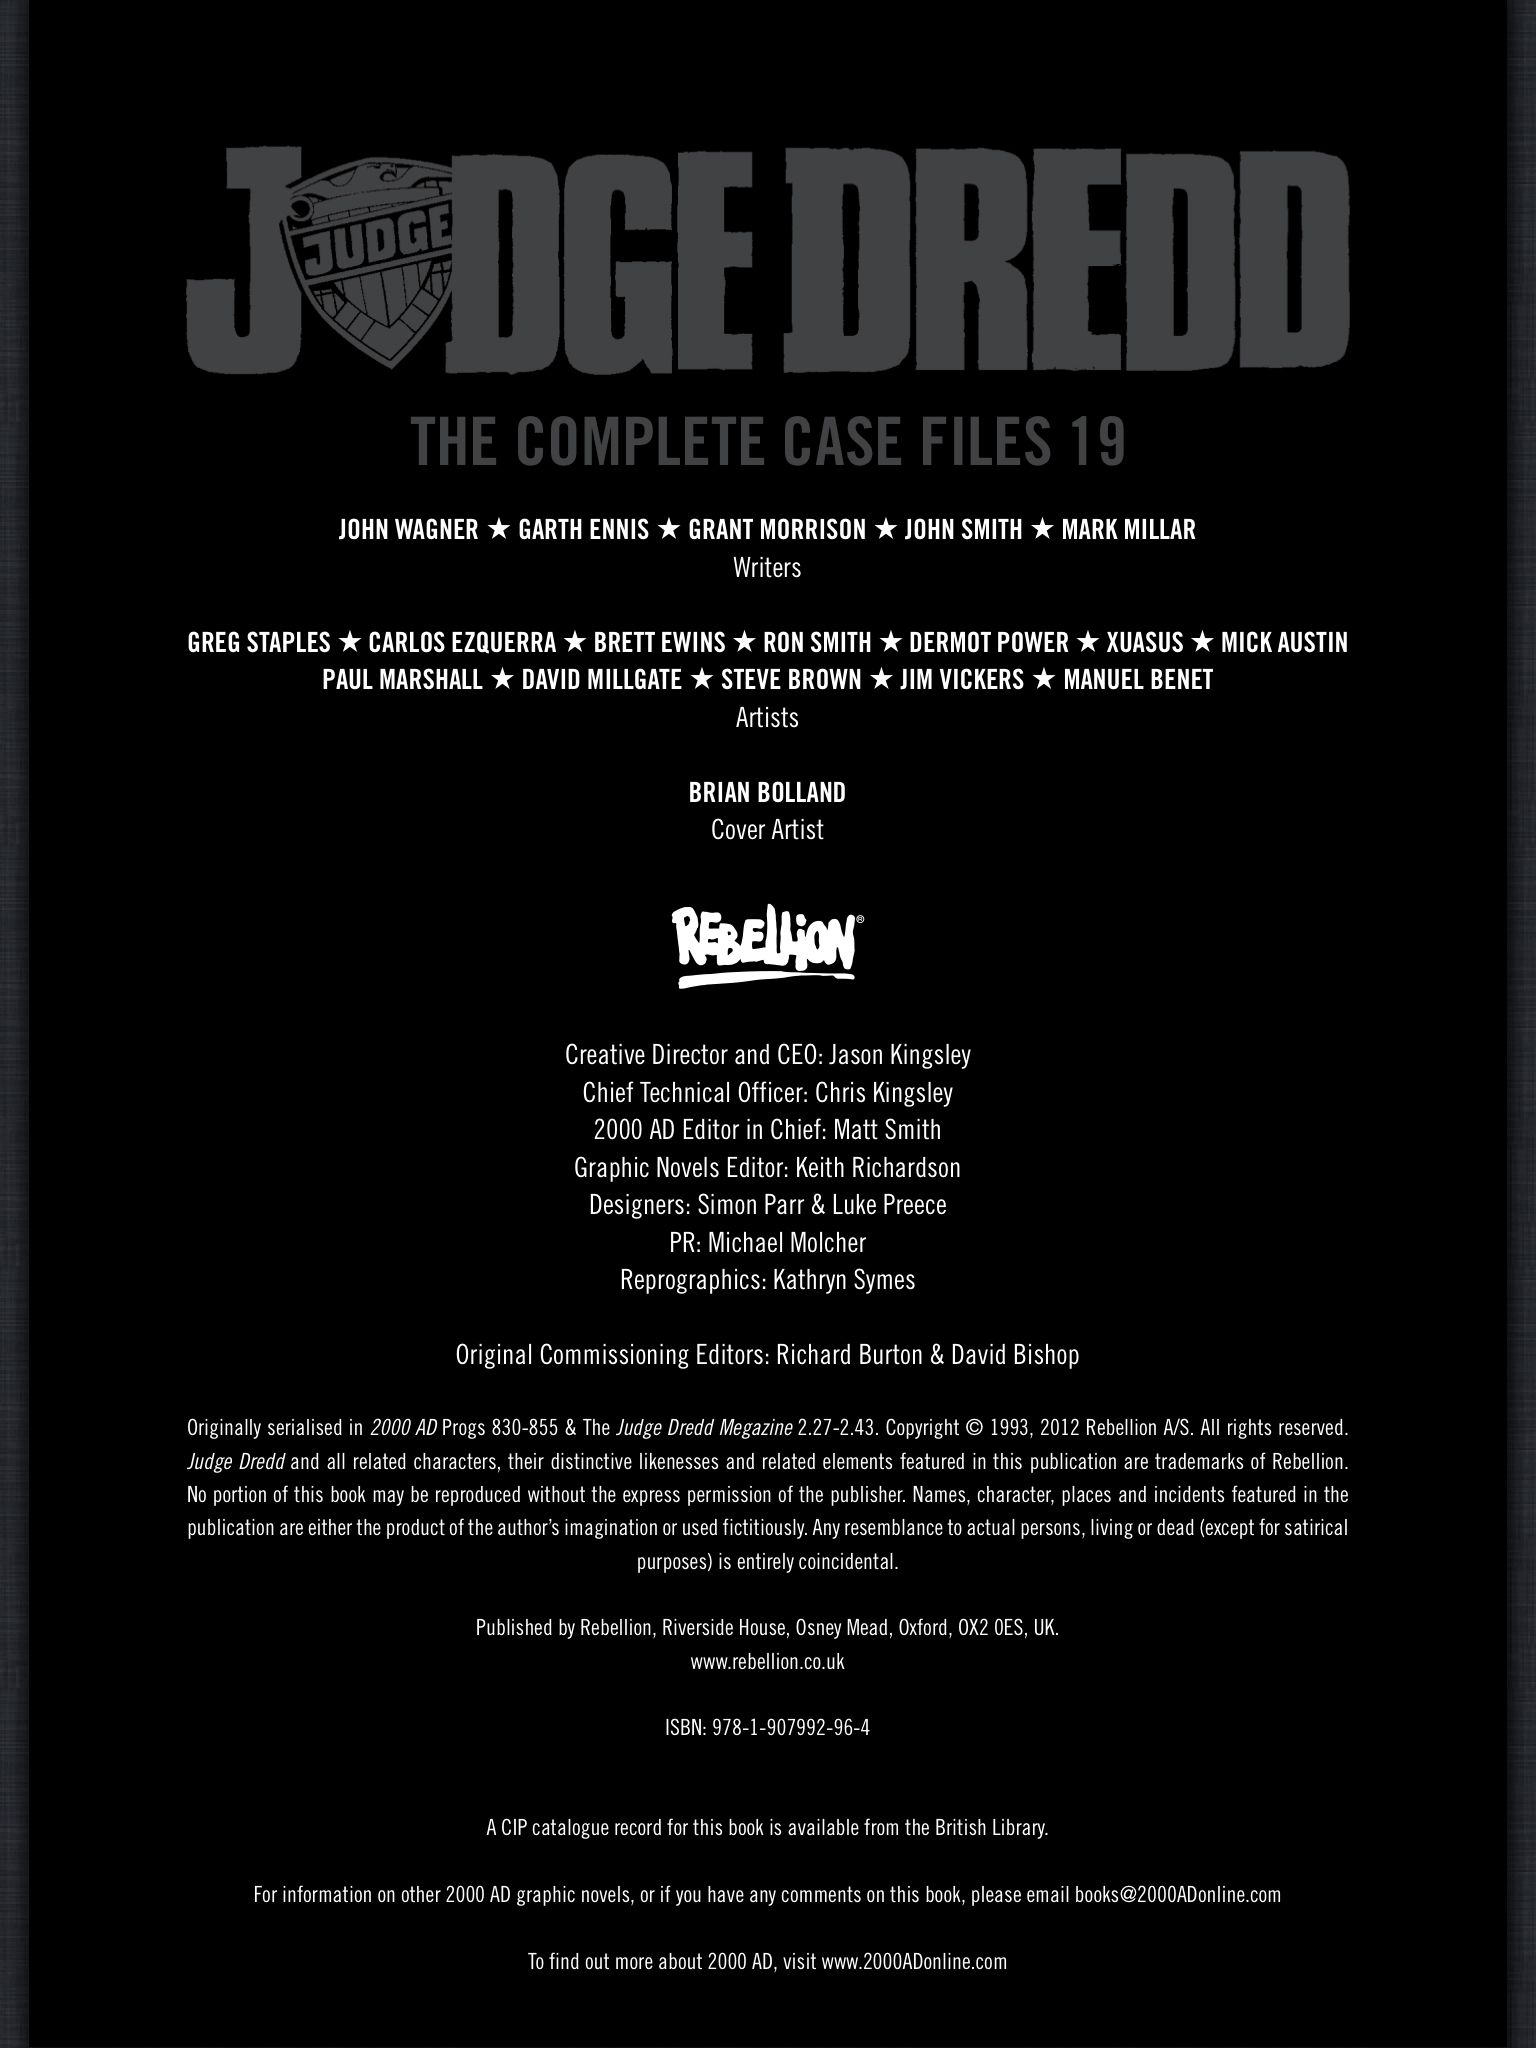 Read online Judge Dredd: The Complete Case Files comic -  Issue # TPB 20 - 2